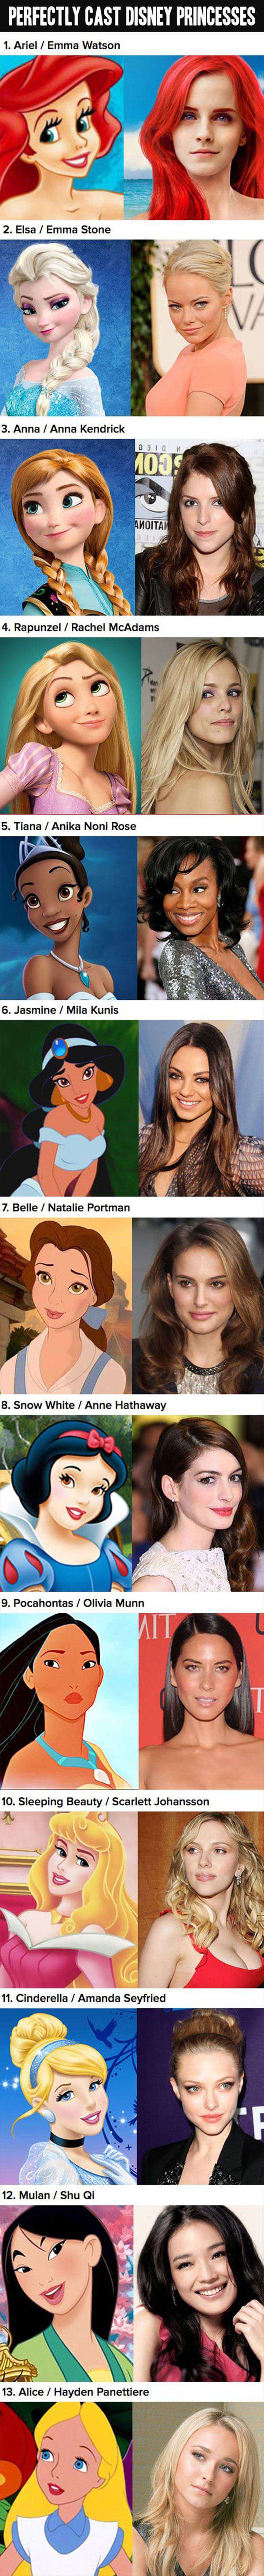 Hollywood-Actresses-Perfectly-Cast-Disney-Princesses-2